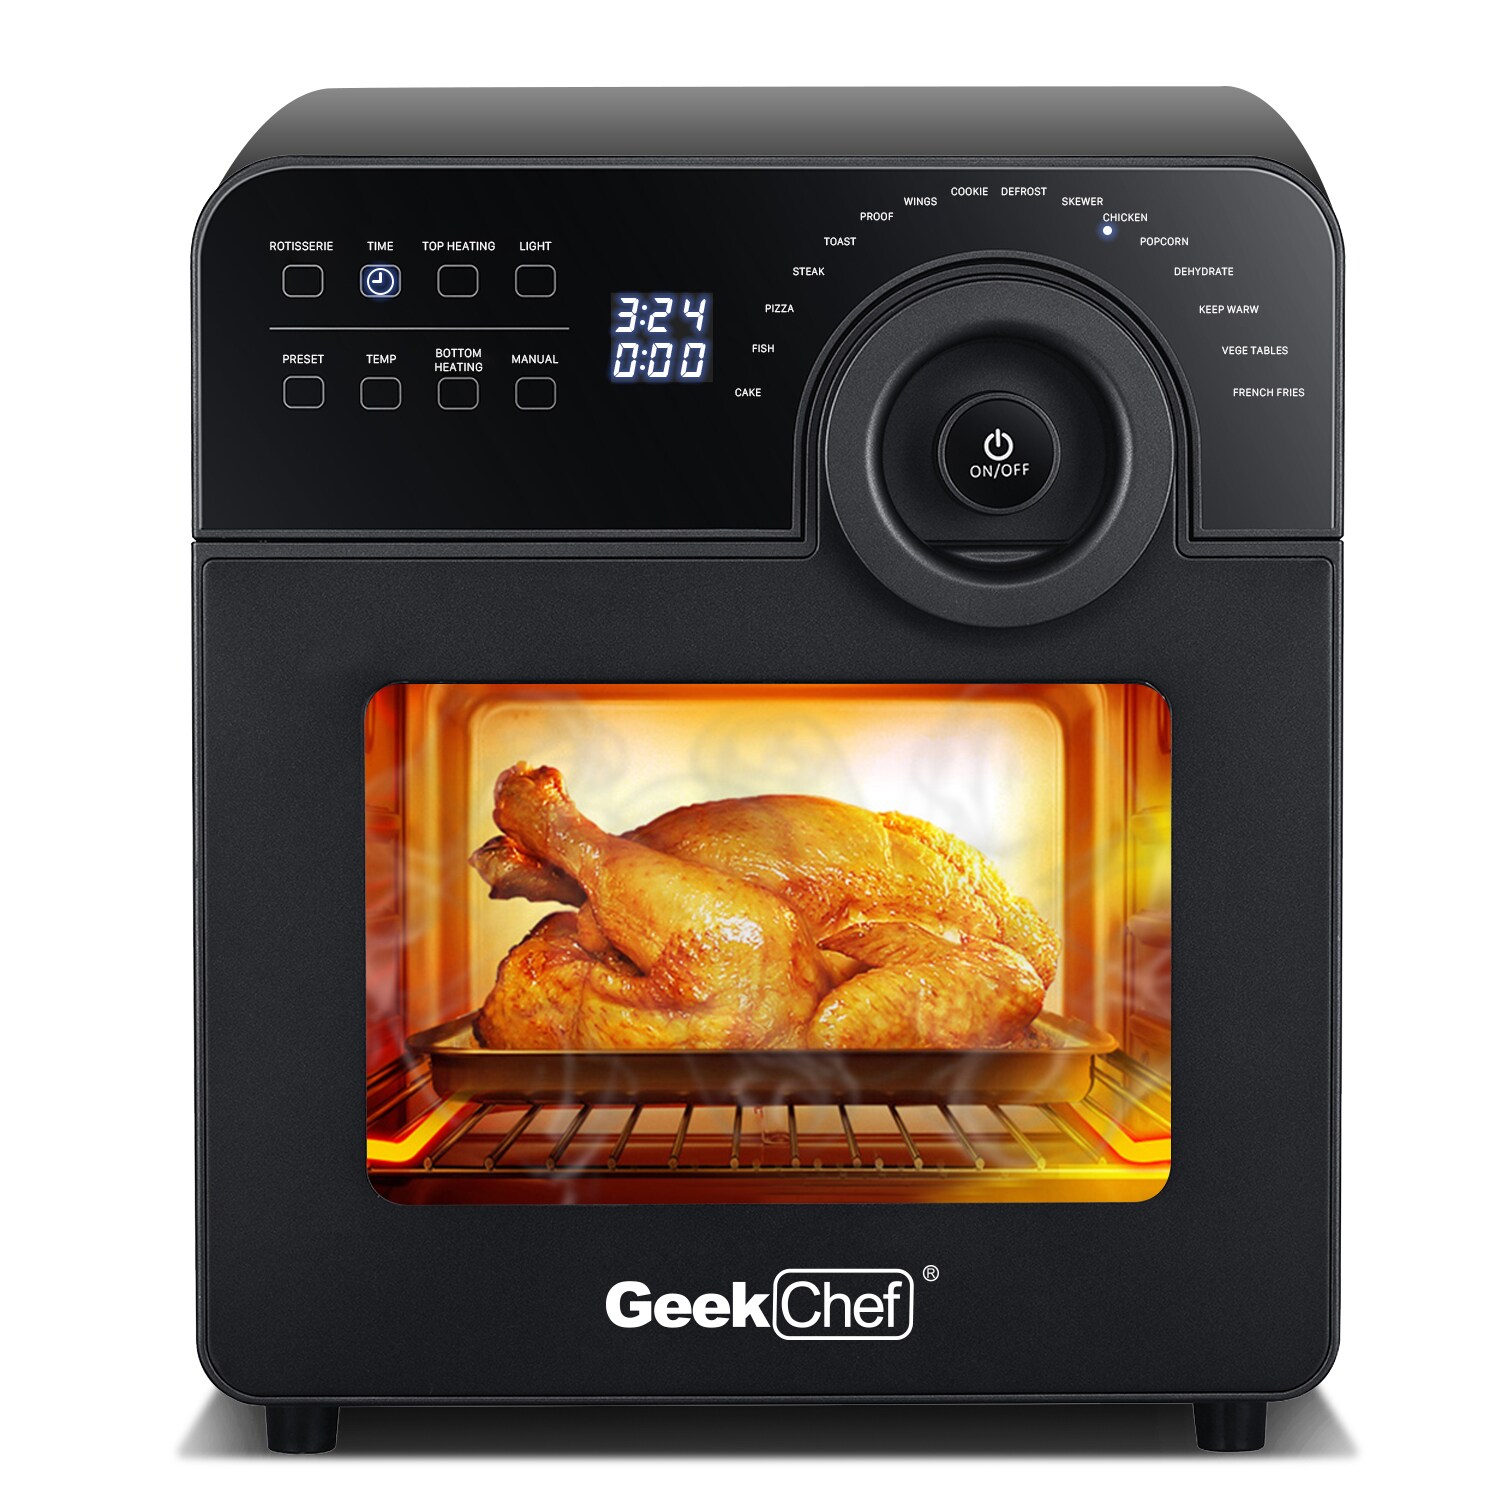 Geek Chef 24.5QT Air Fryer Toaster Oven 7-in-1 Large Airfryer Convection  Countertop Oven Combo Roast Bake Broil Reheat Fry Oil-Free Rotisserie  Dehydrator with Bake Tray Rack Basket Crumb Tray 1700W 